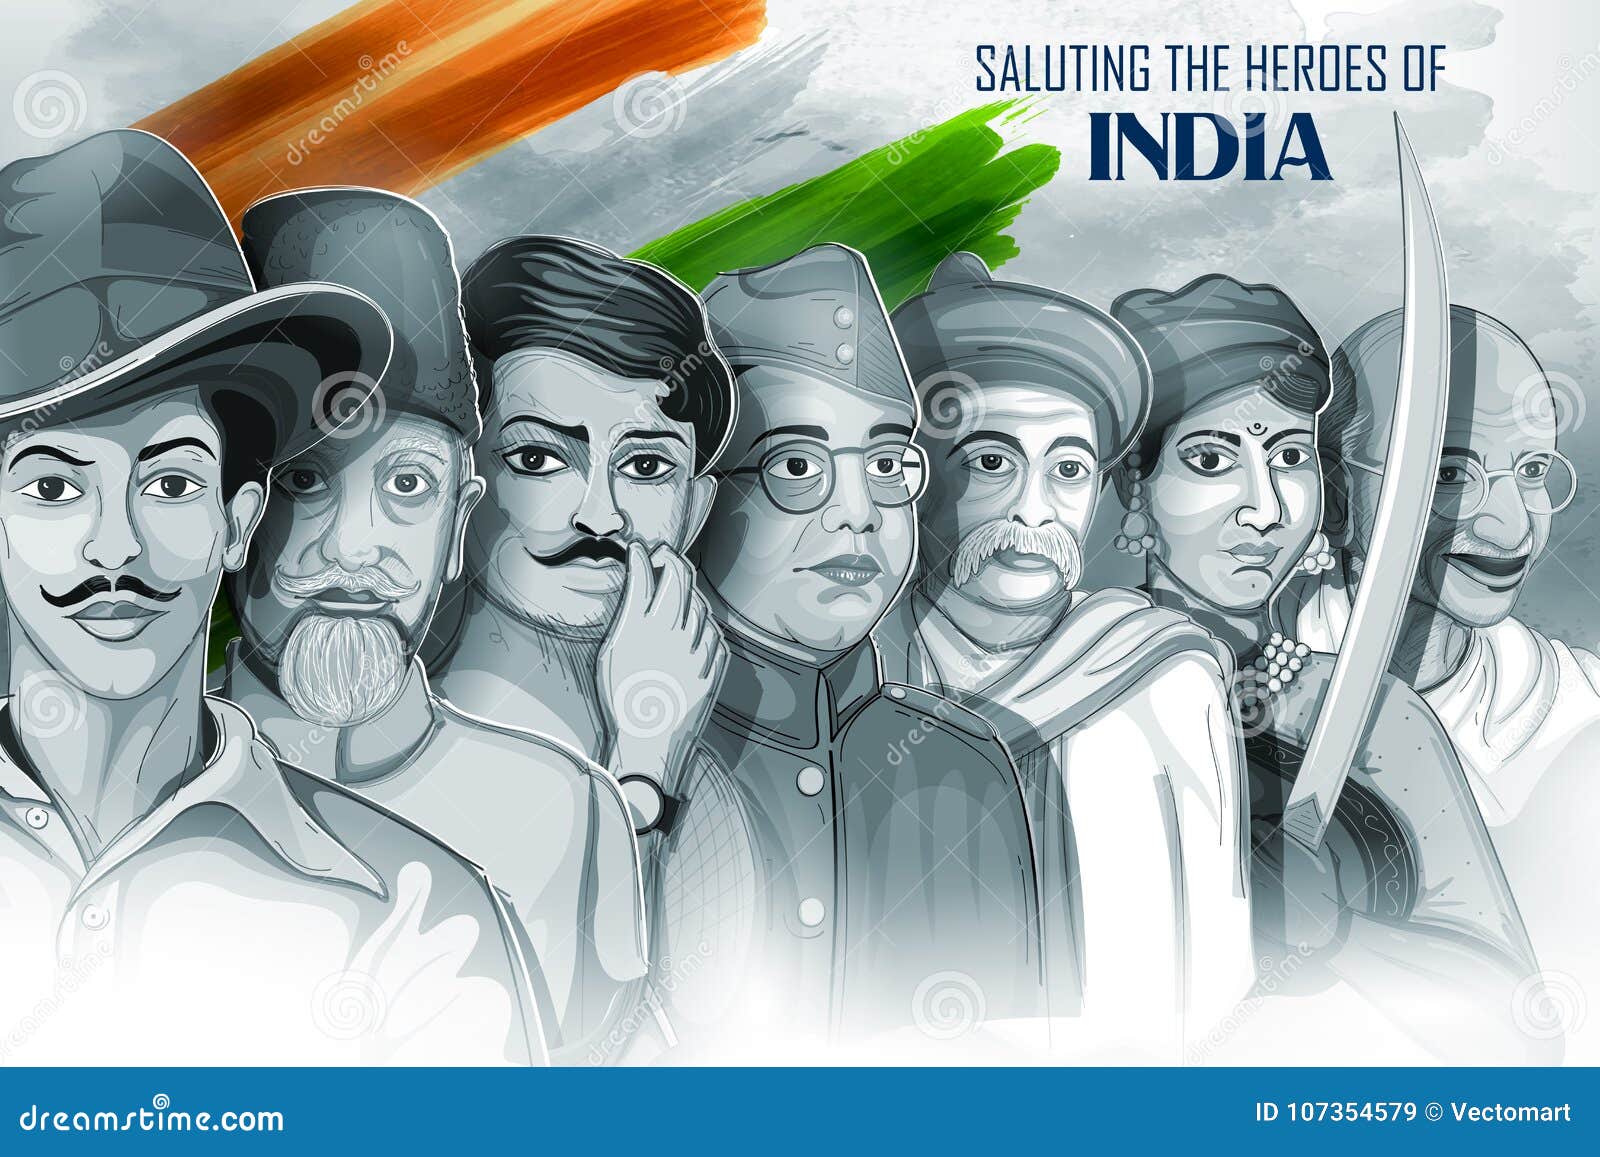 Independence Day 2021: Unsung heroes of Indian Freedom Struggle